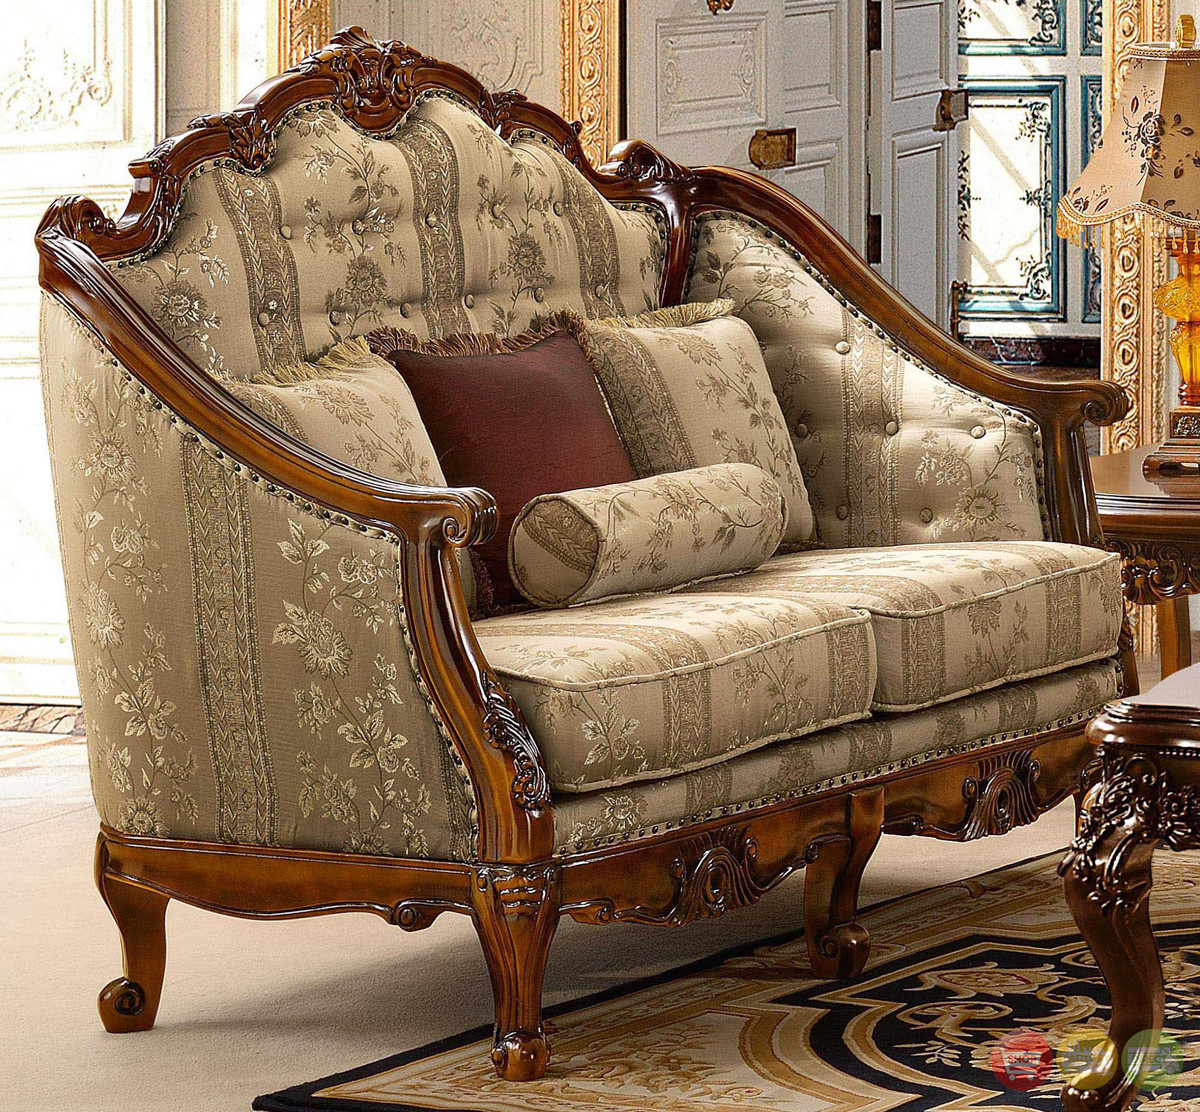 Living Room Chair Styles
 Antique Style Luxury Formal Living Room Furniture Set HD 953